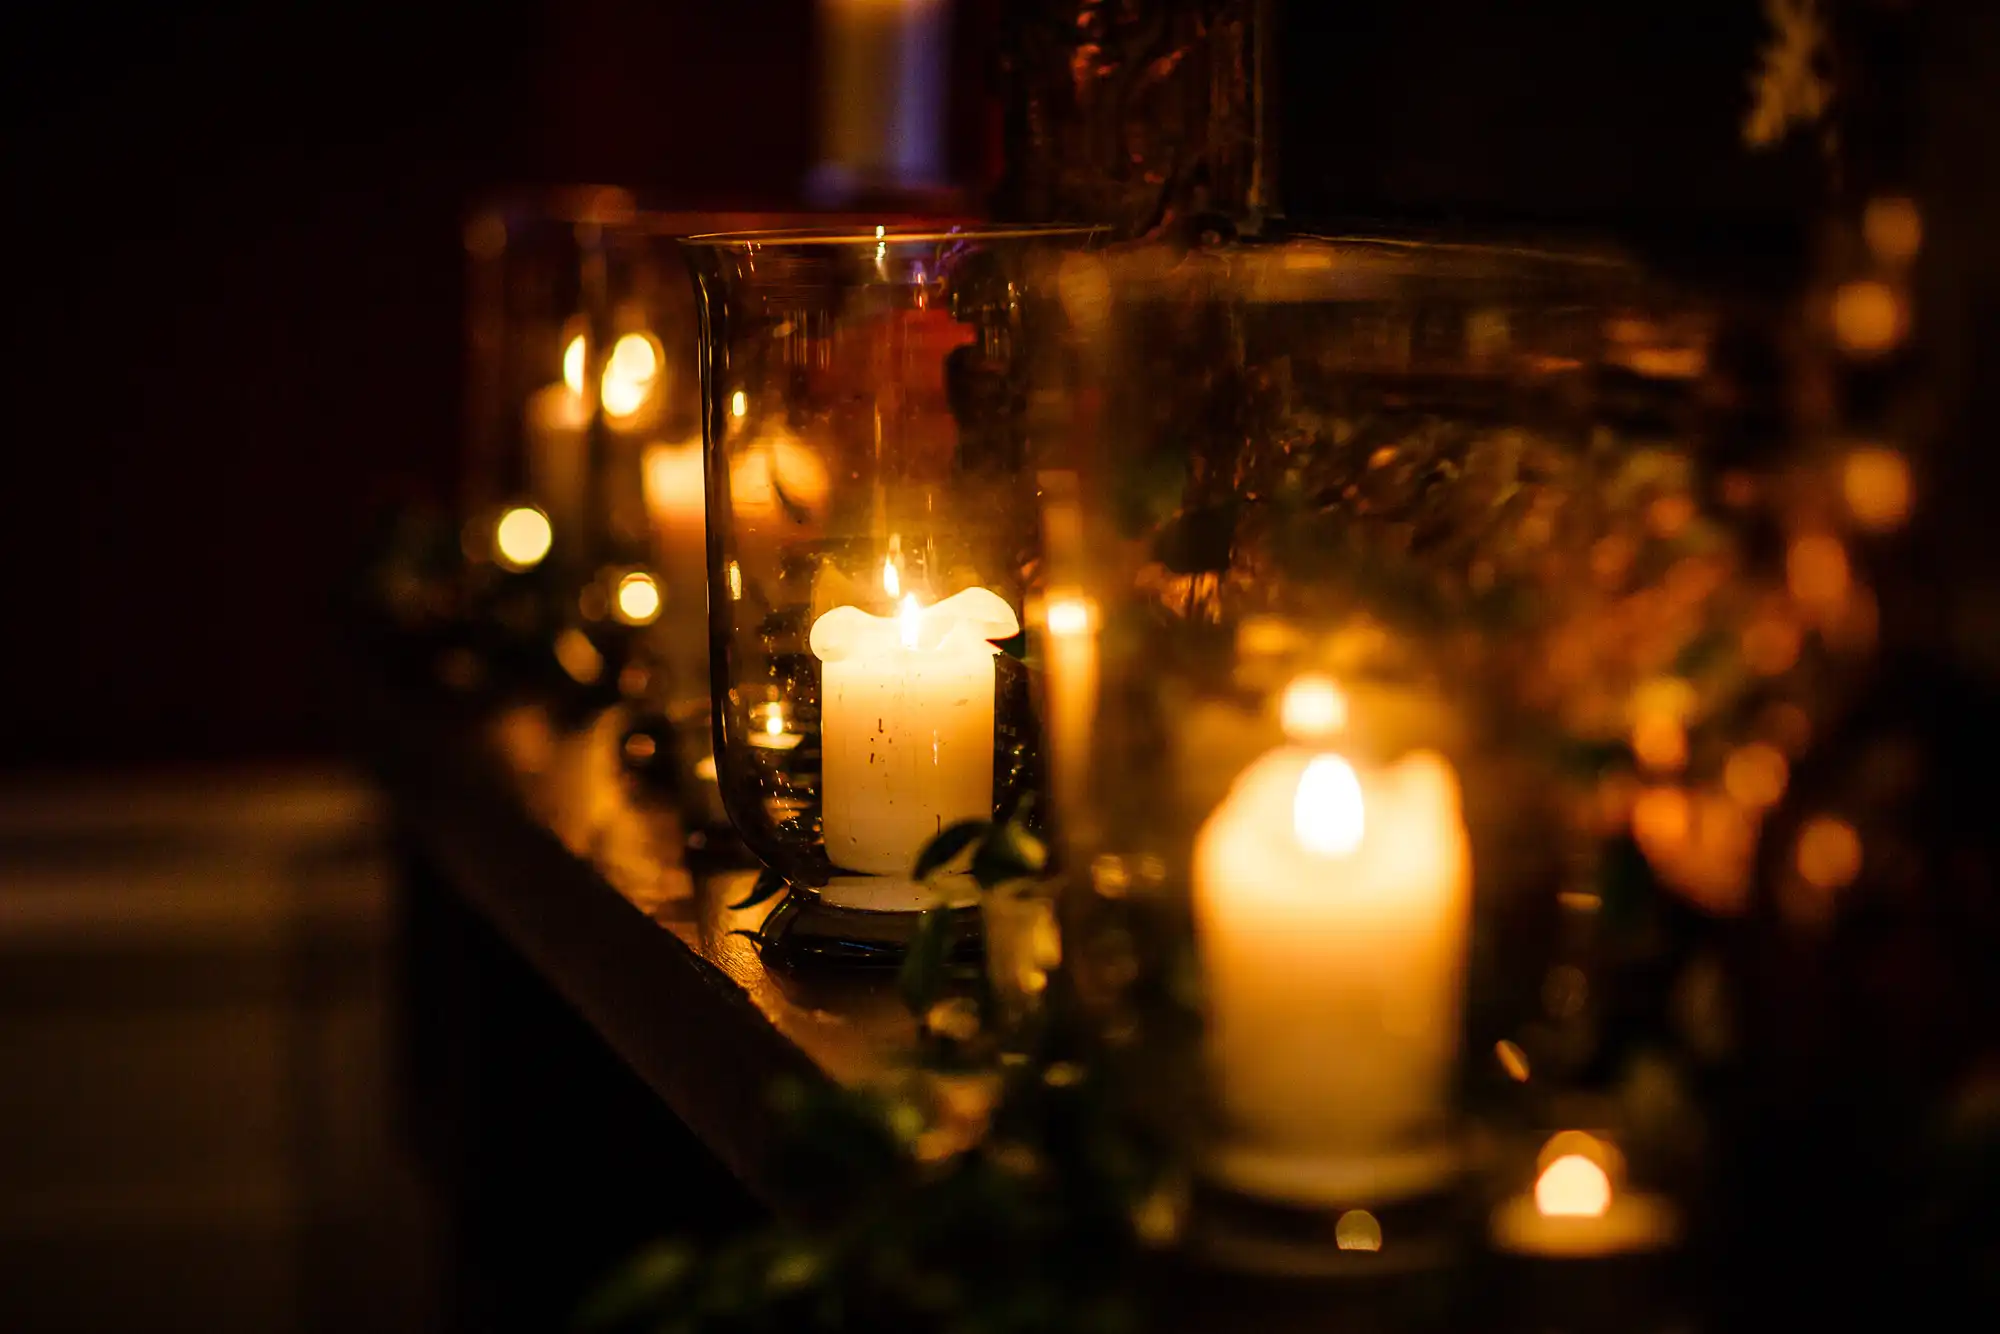 Candles glowing warmly inside glass holders, adorned with festive decorations on a shelf.